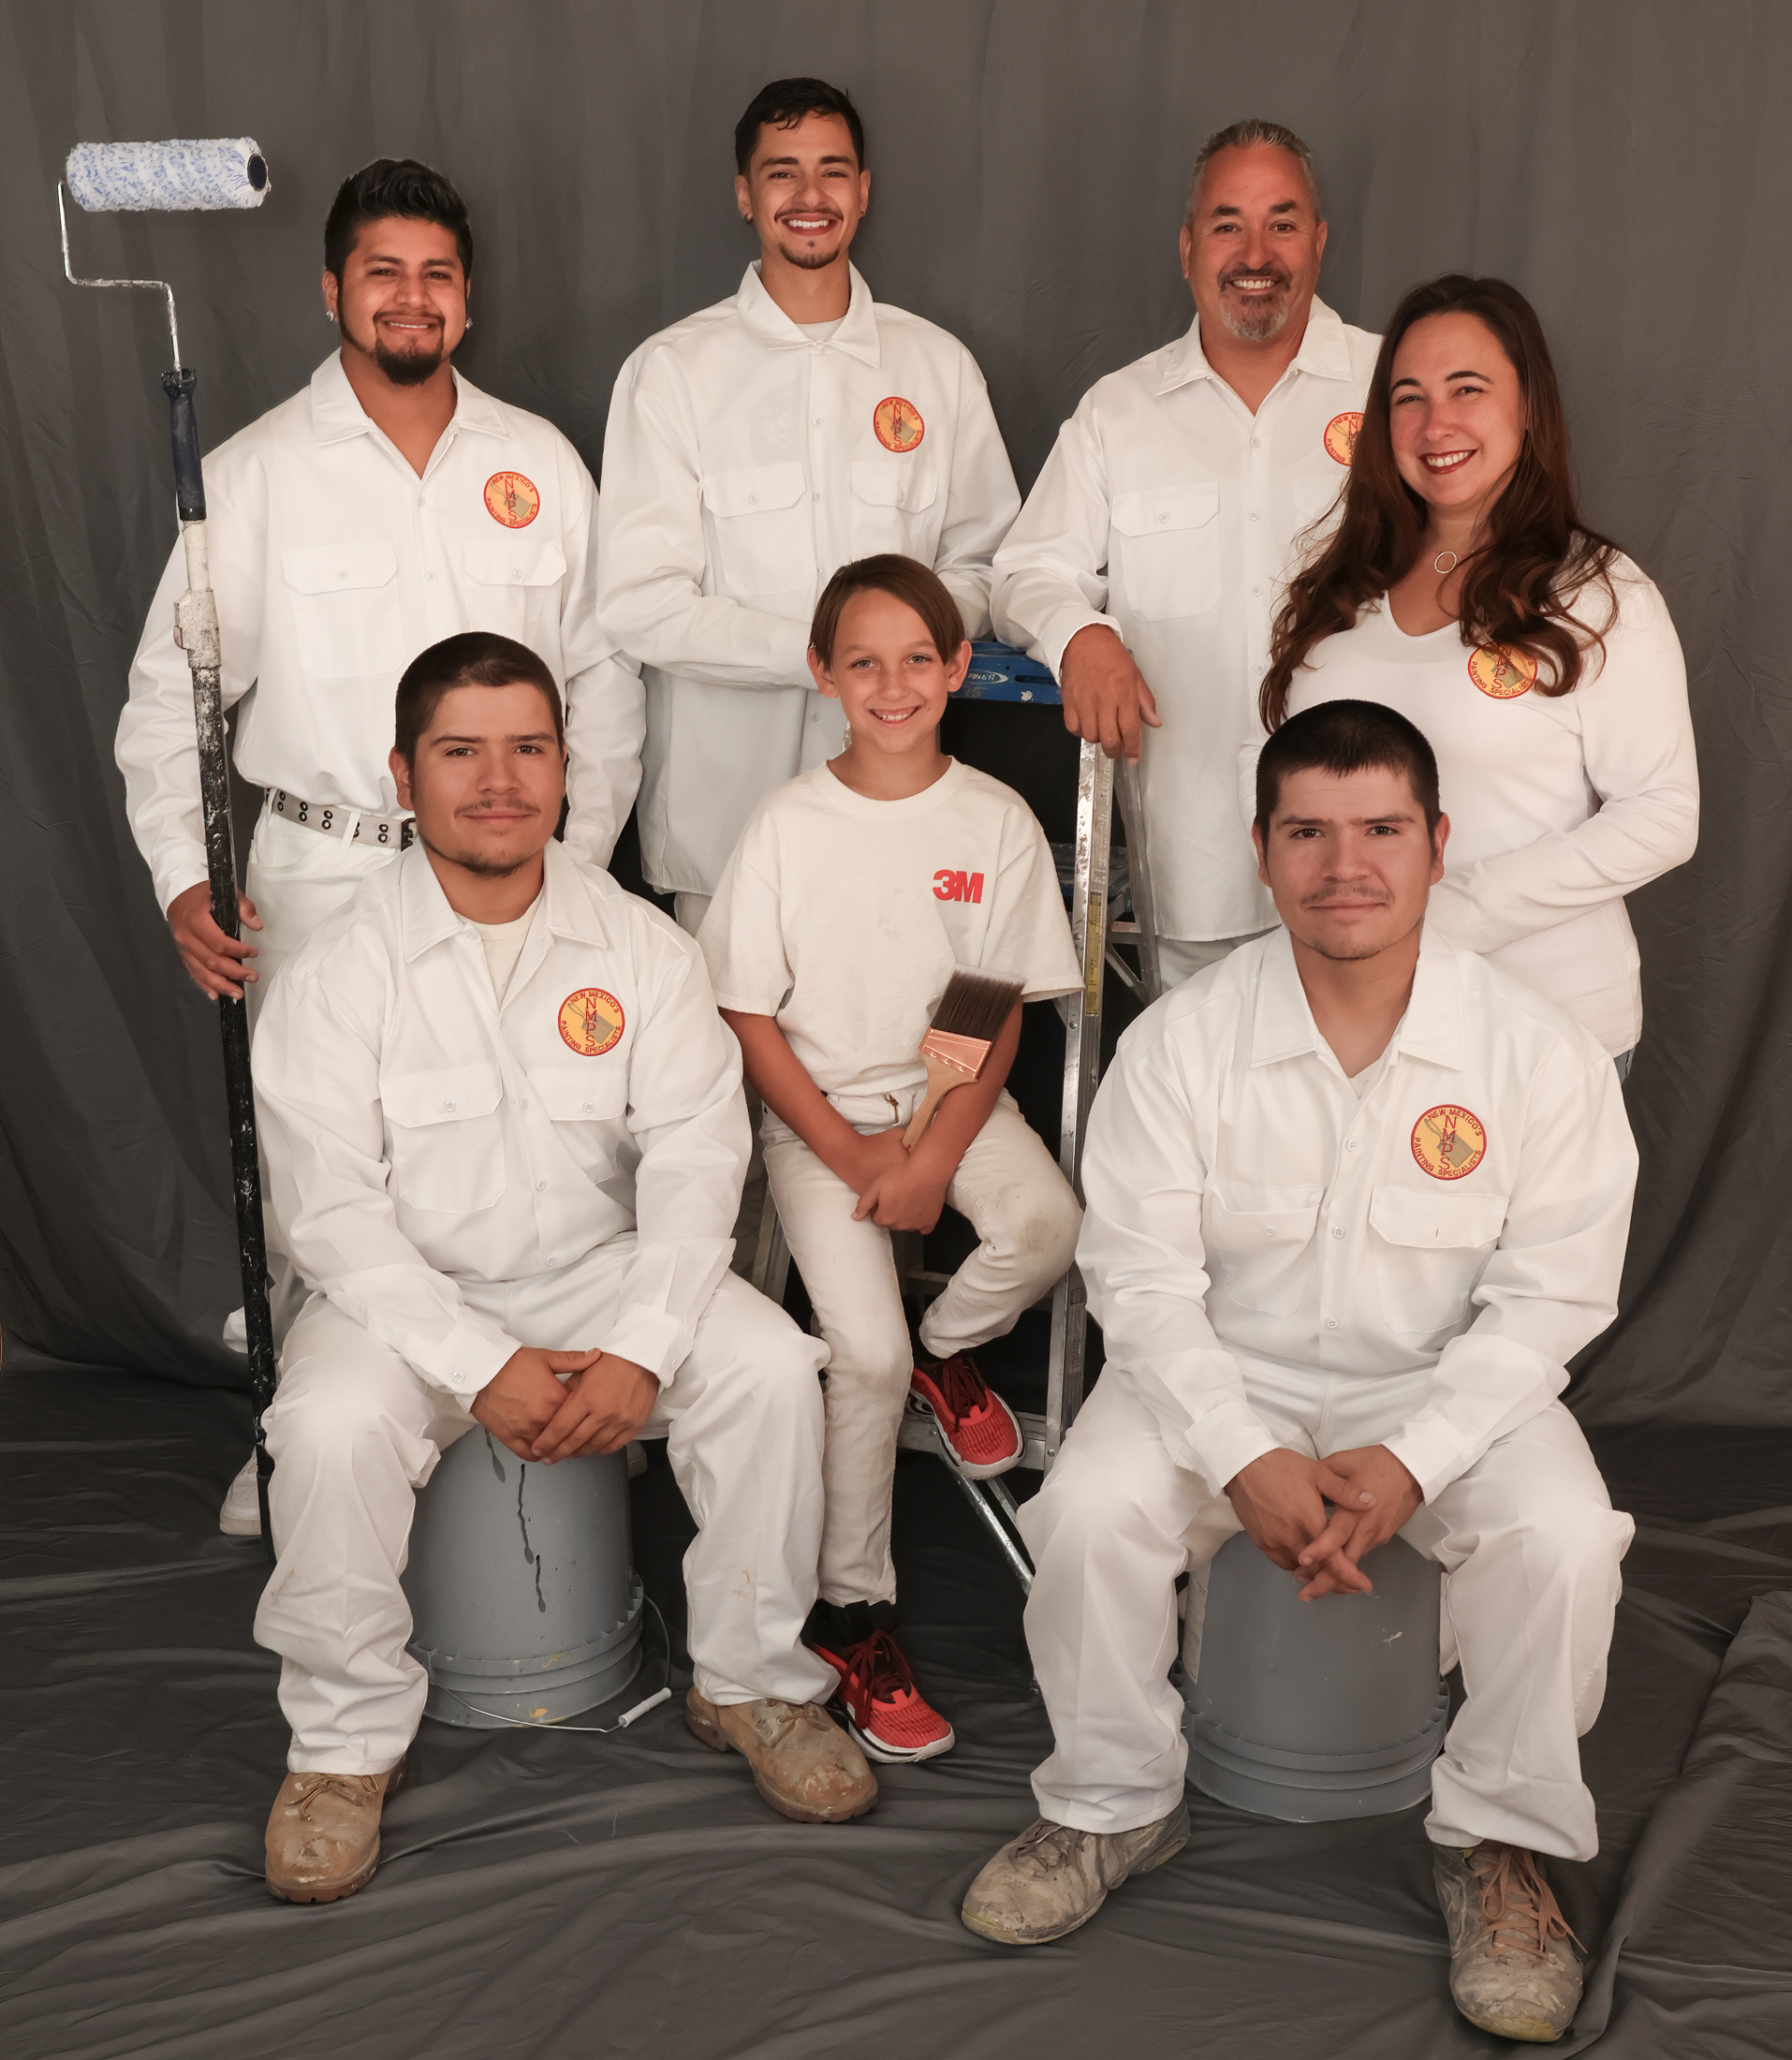 New Mexico's Painting Specialist group photo